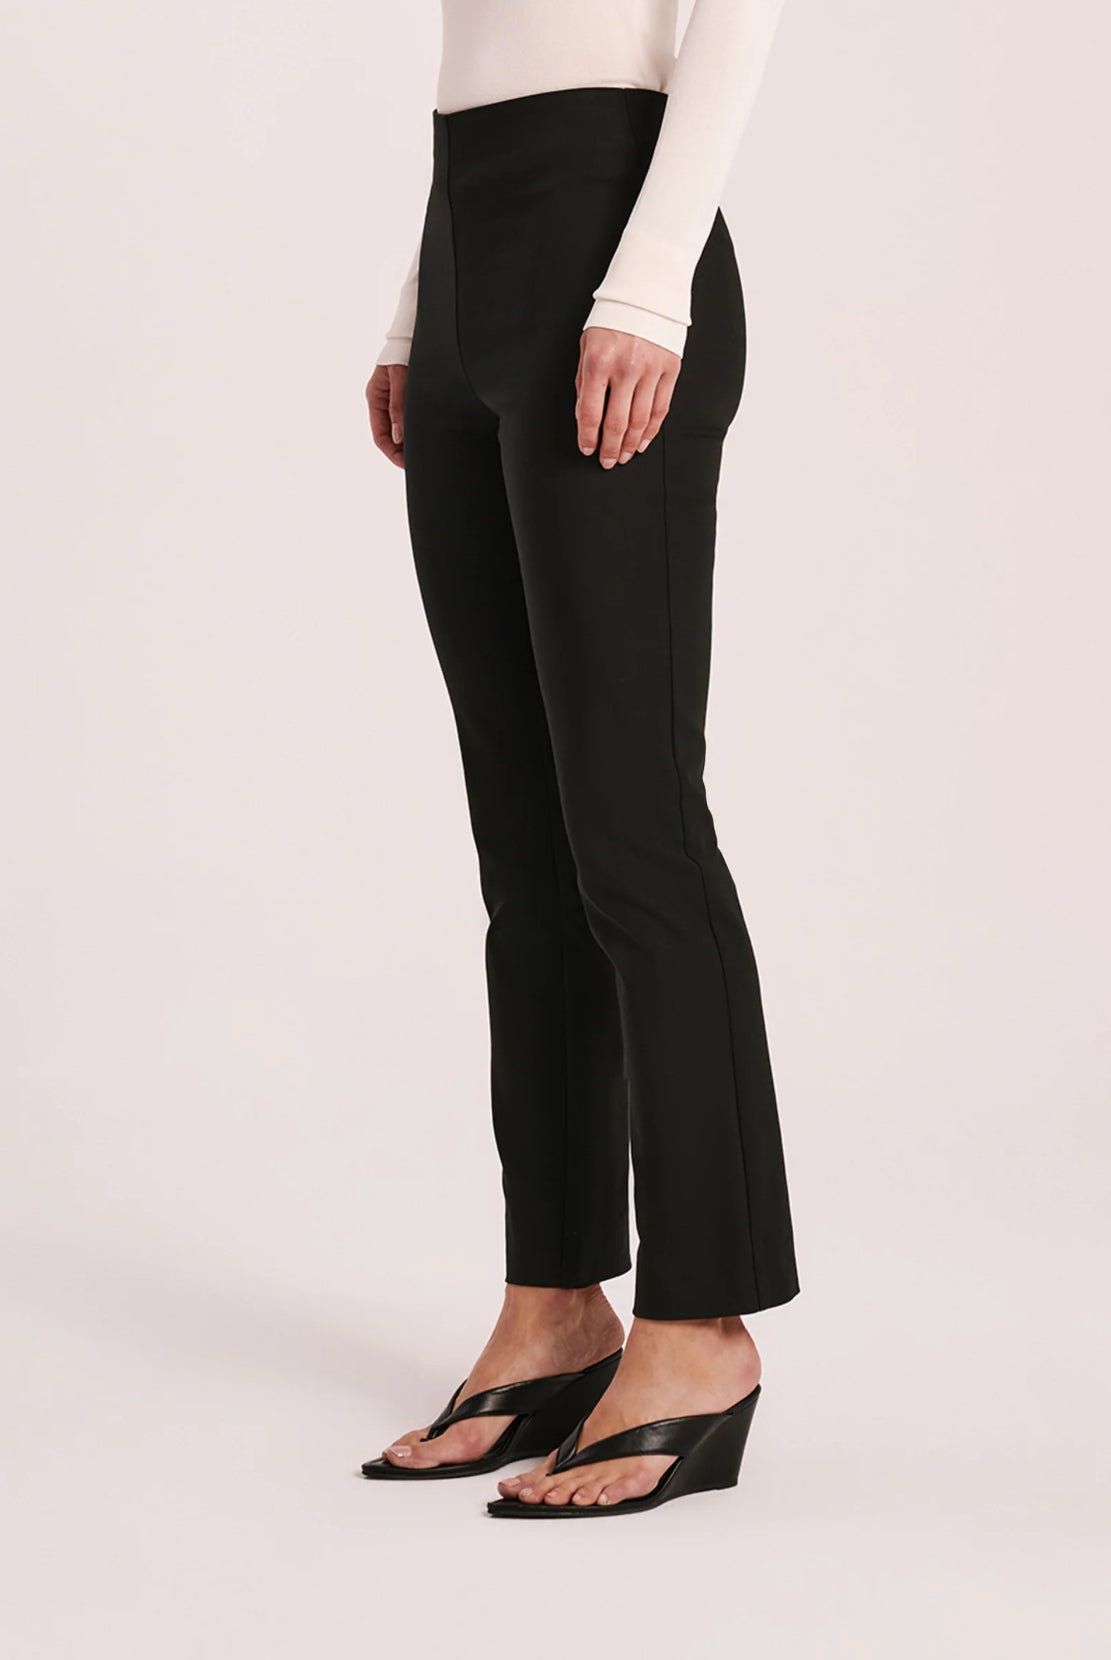 Nude Lucy Delyse Pant in Black